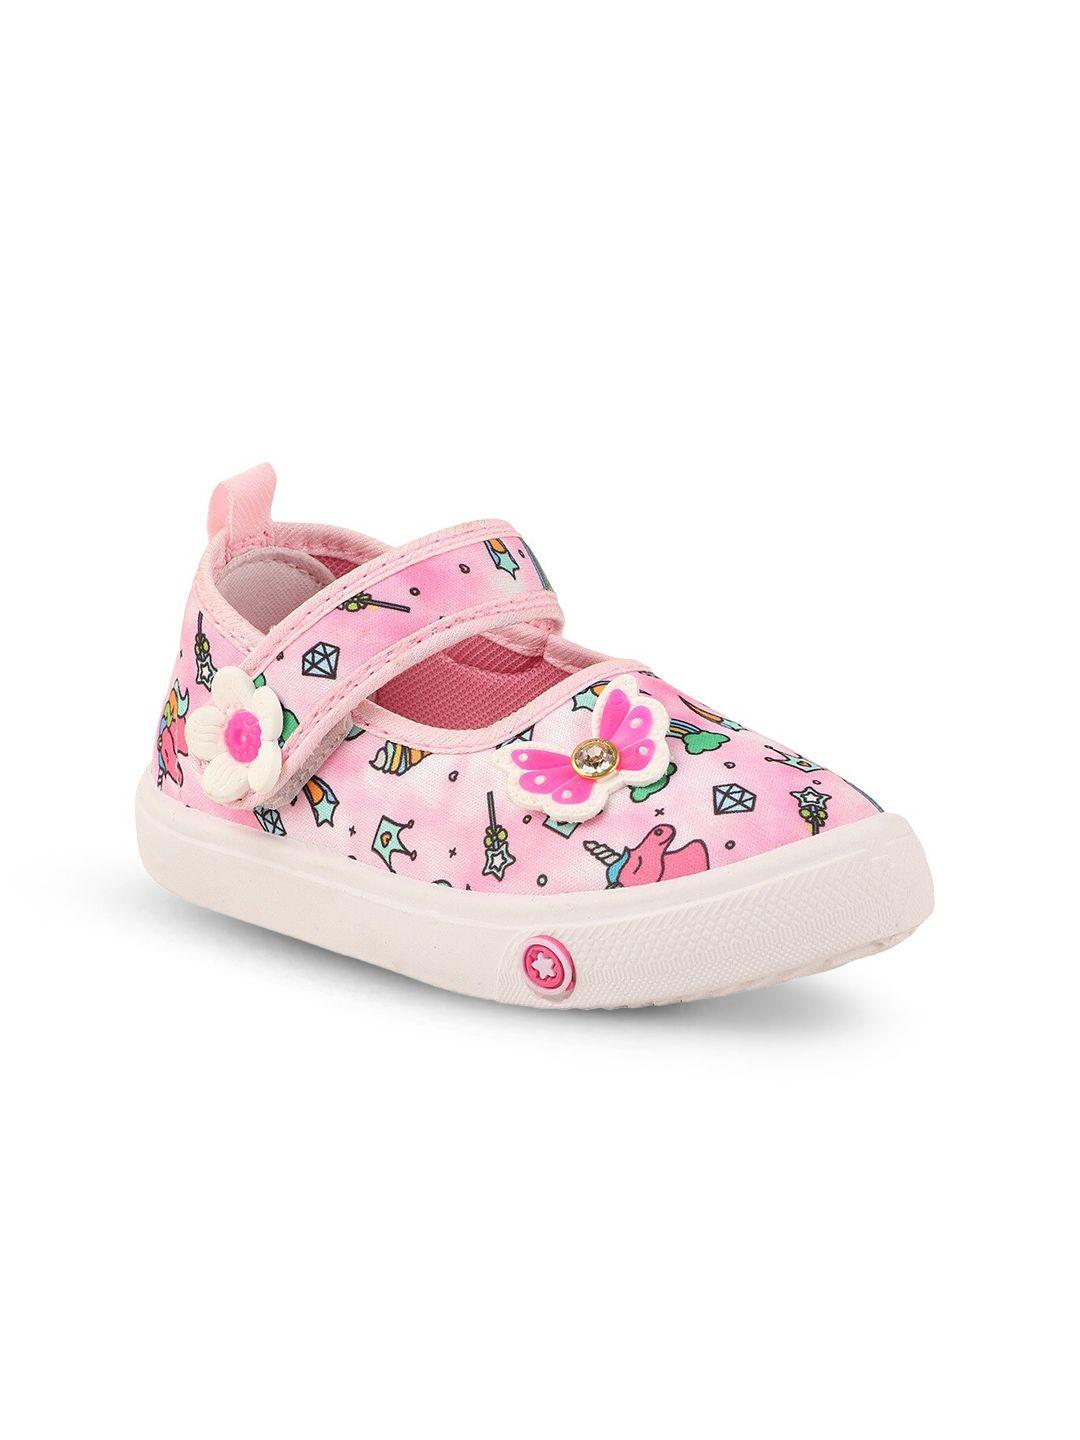 baesd girls printed embellished comfort insole sneakers